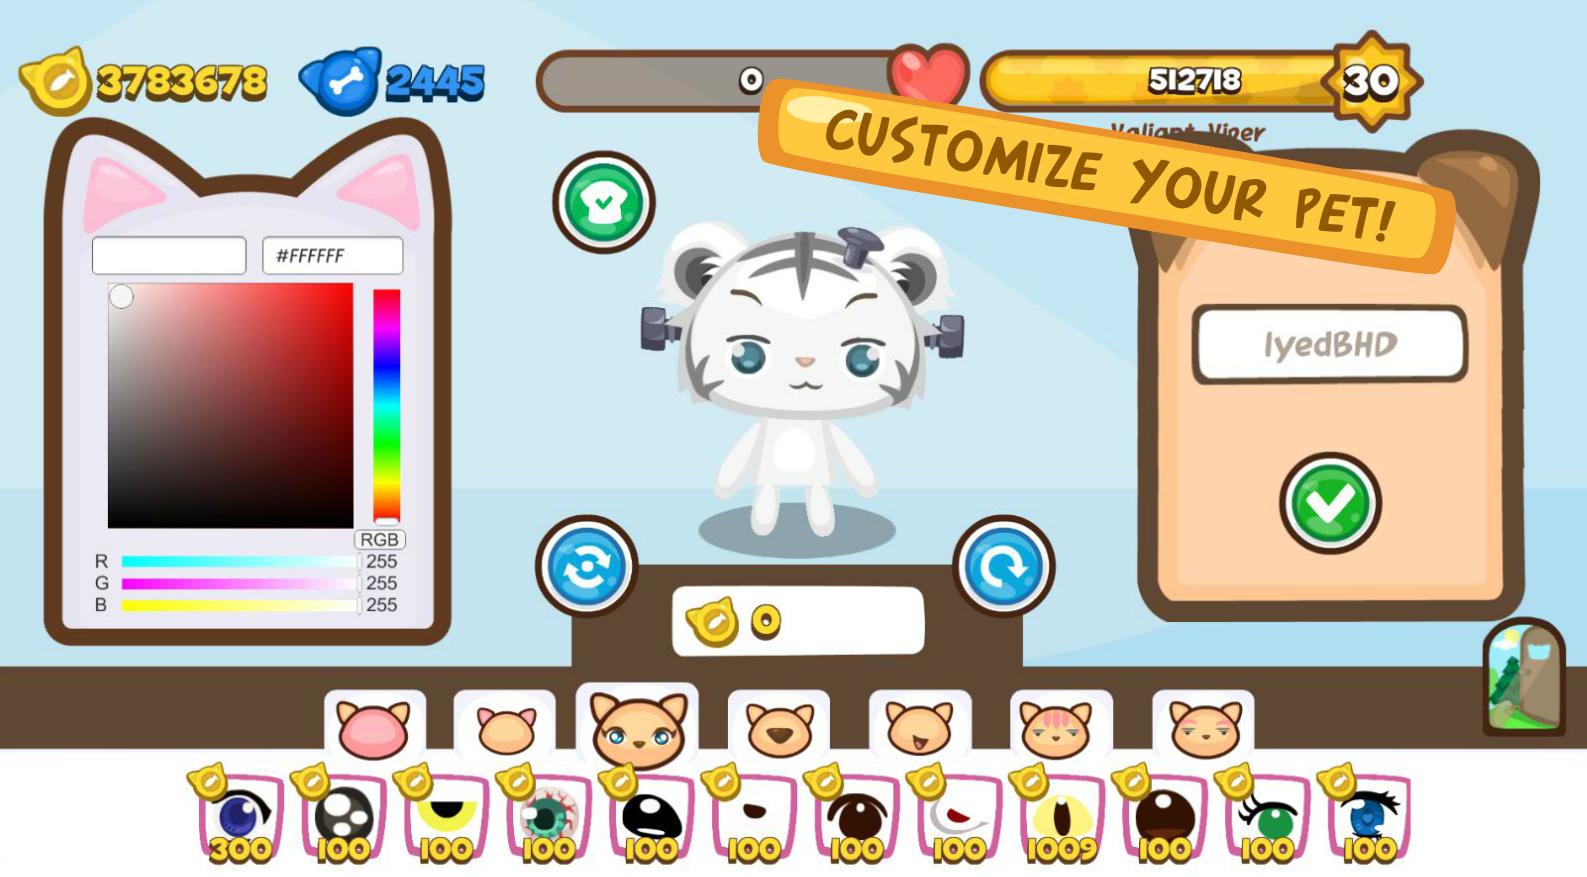 Pet Pals for Android - APK Download